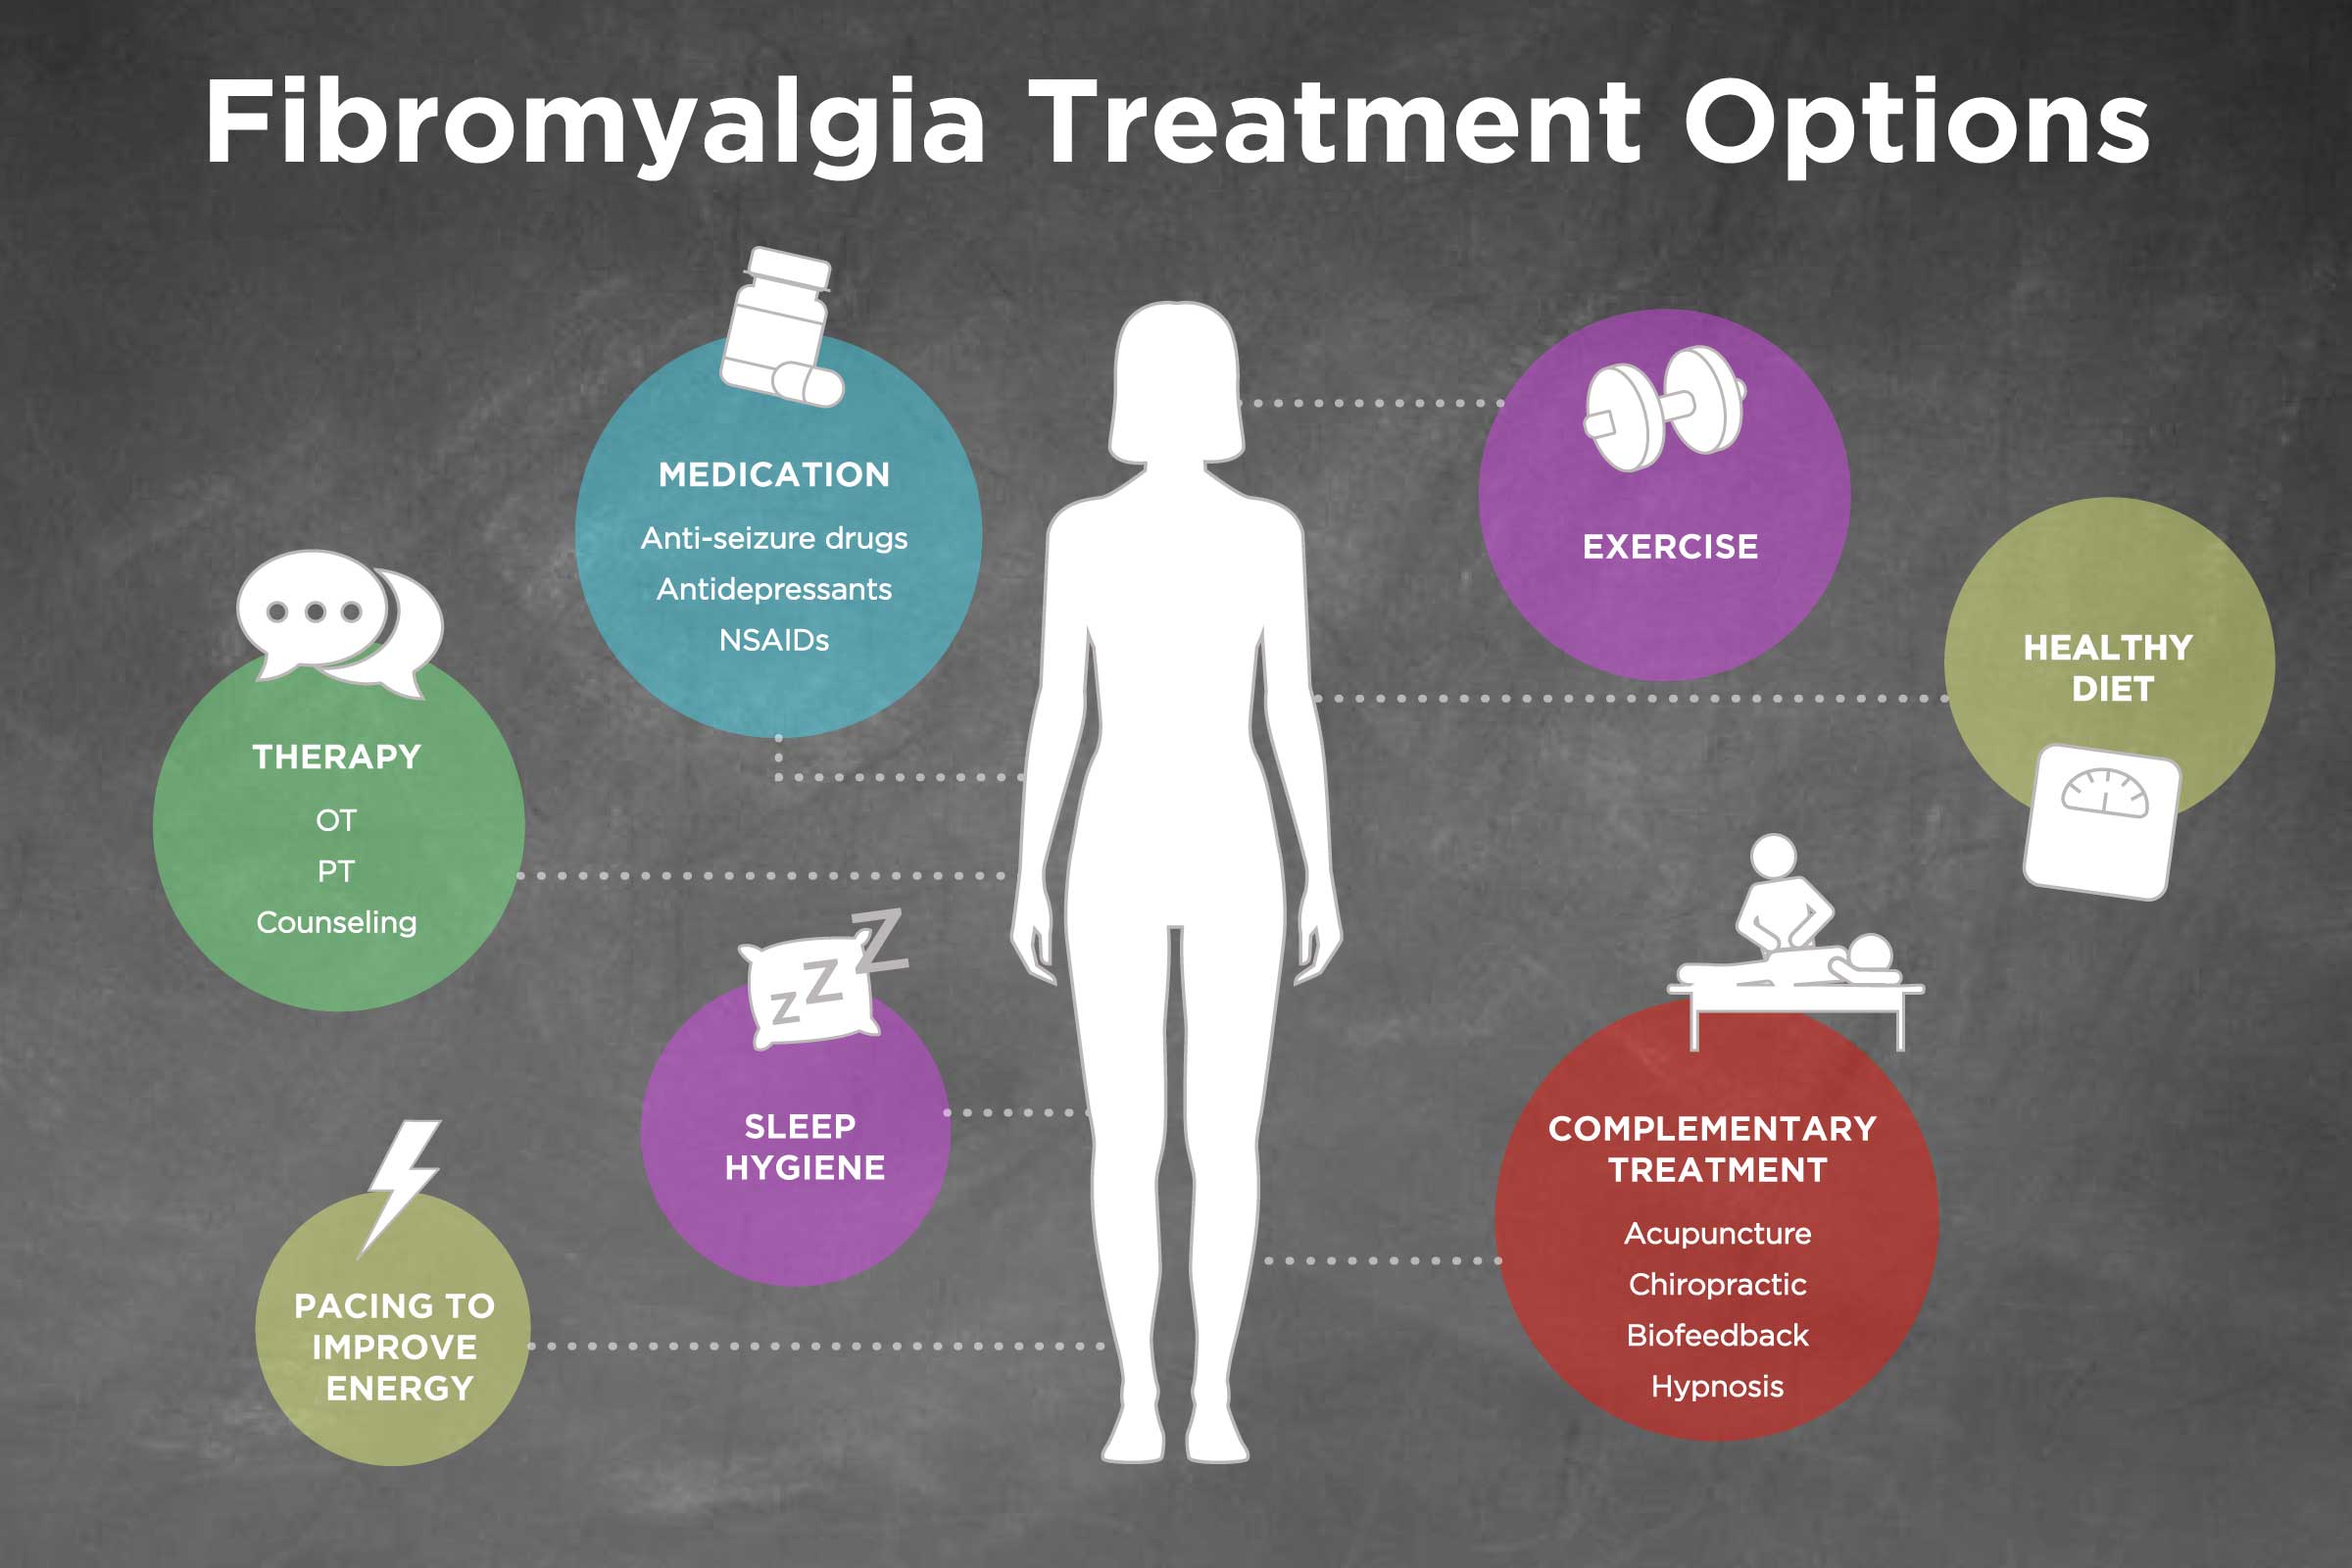 What are some pain relief options for fibromyalgia?